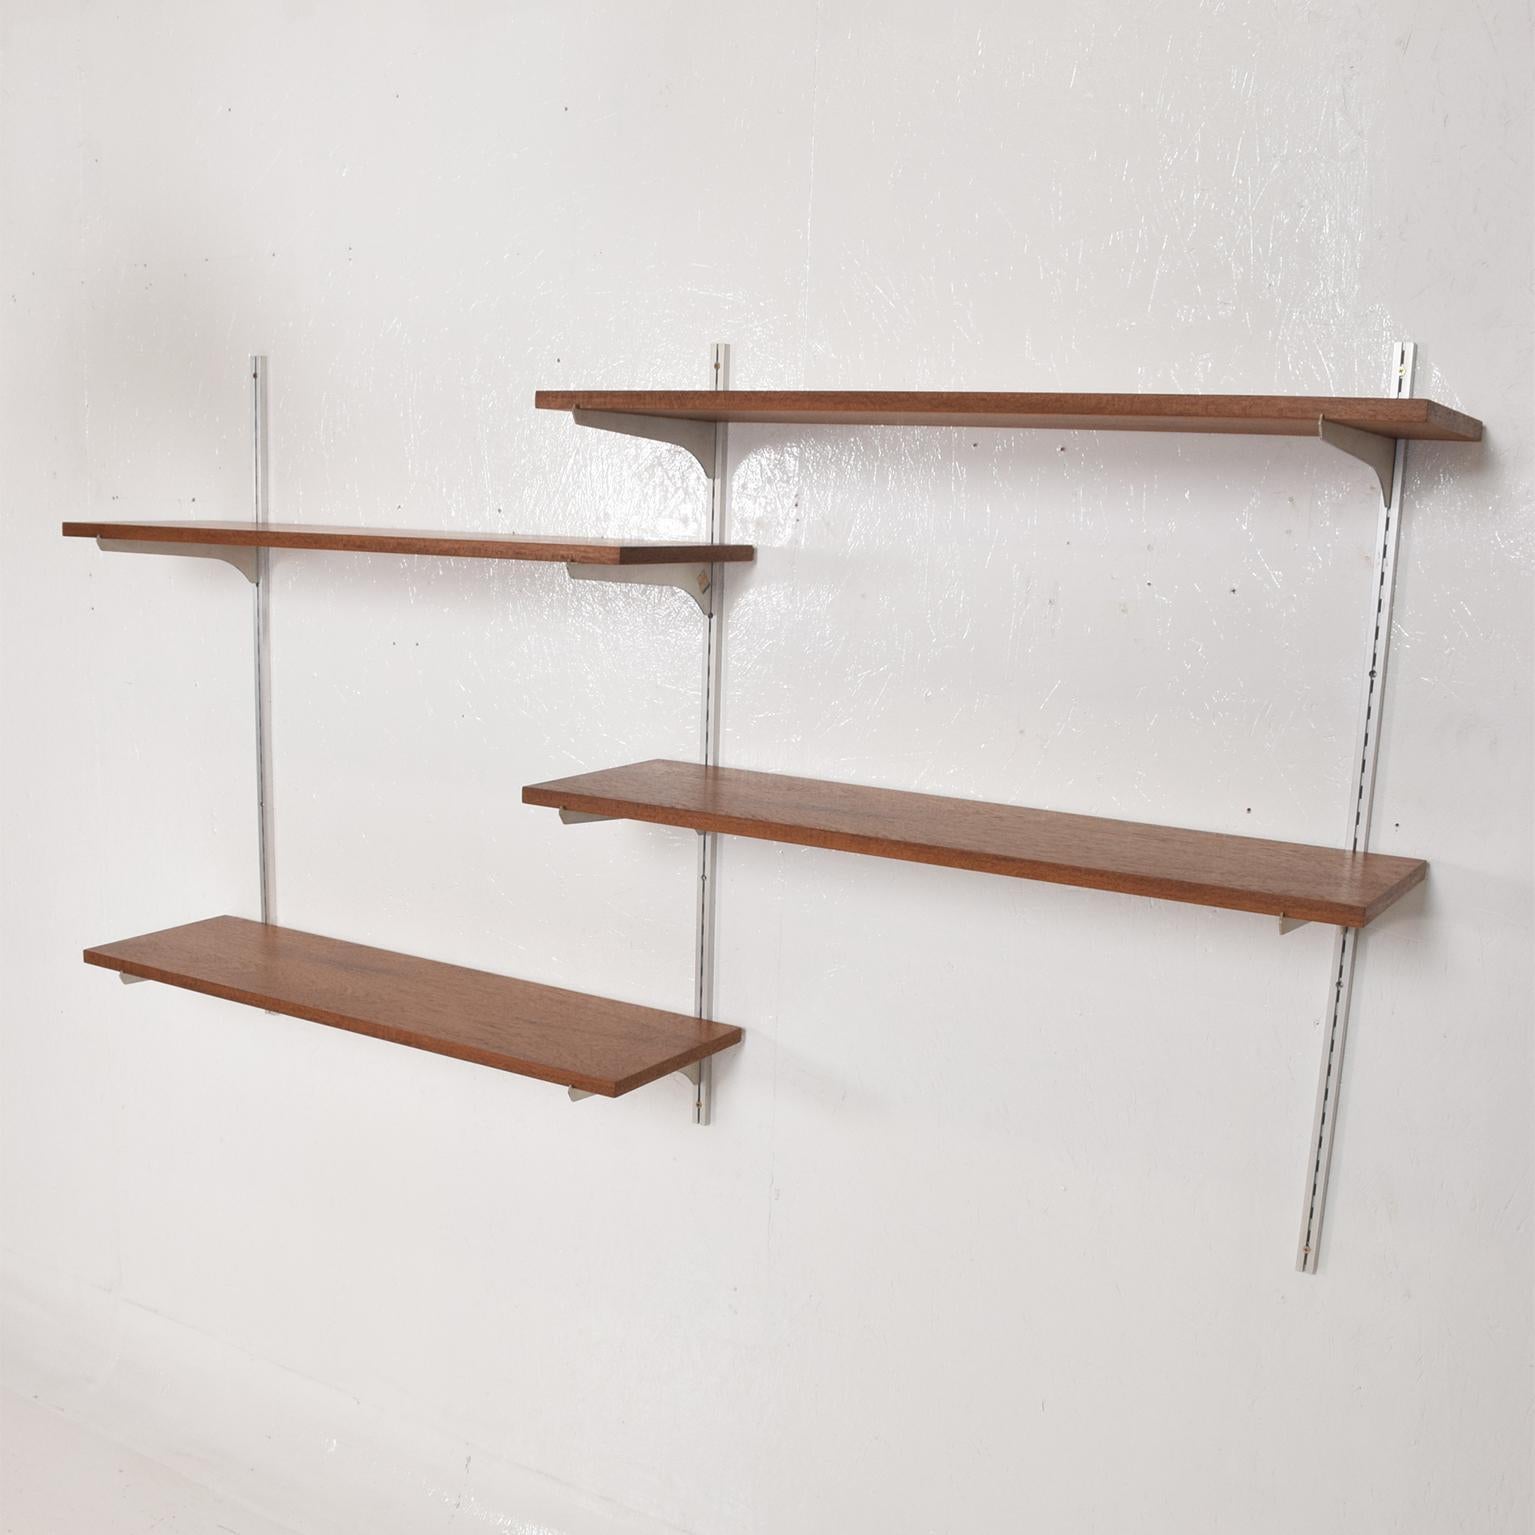 For your consideration, a Mid-Century Modern teak and aluminum wall unit shelving teak and aluminum.

Unmarked. The USA, circa 1960s. 

Dimensions: 36 1/2